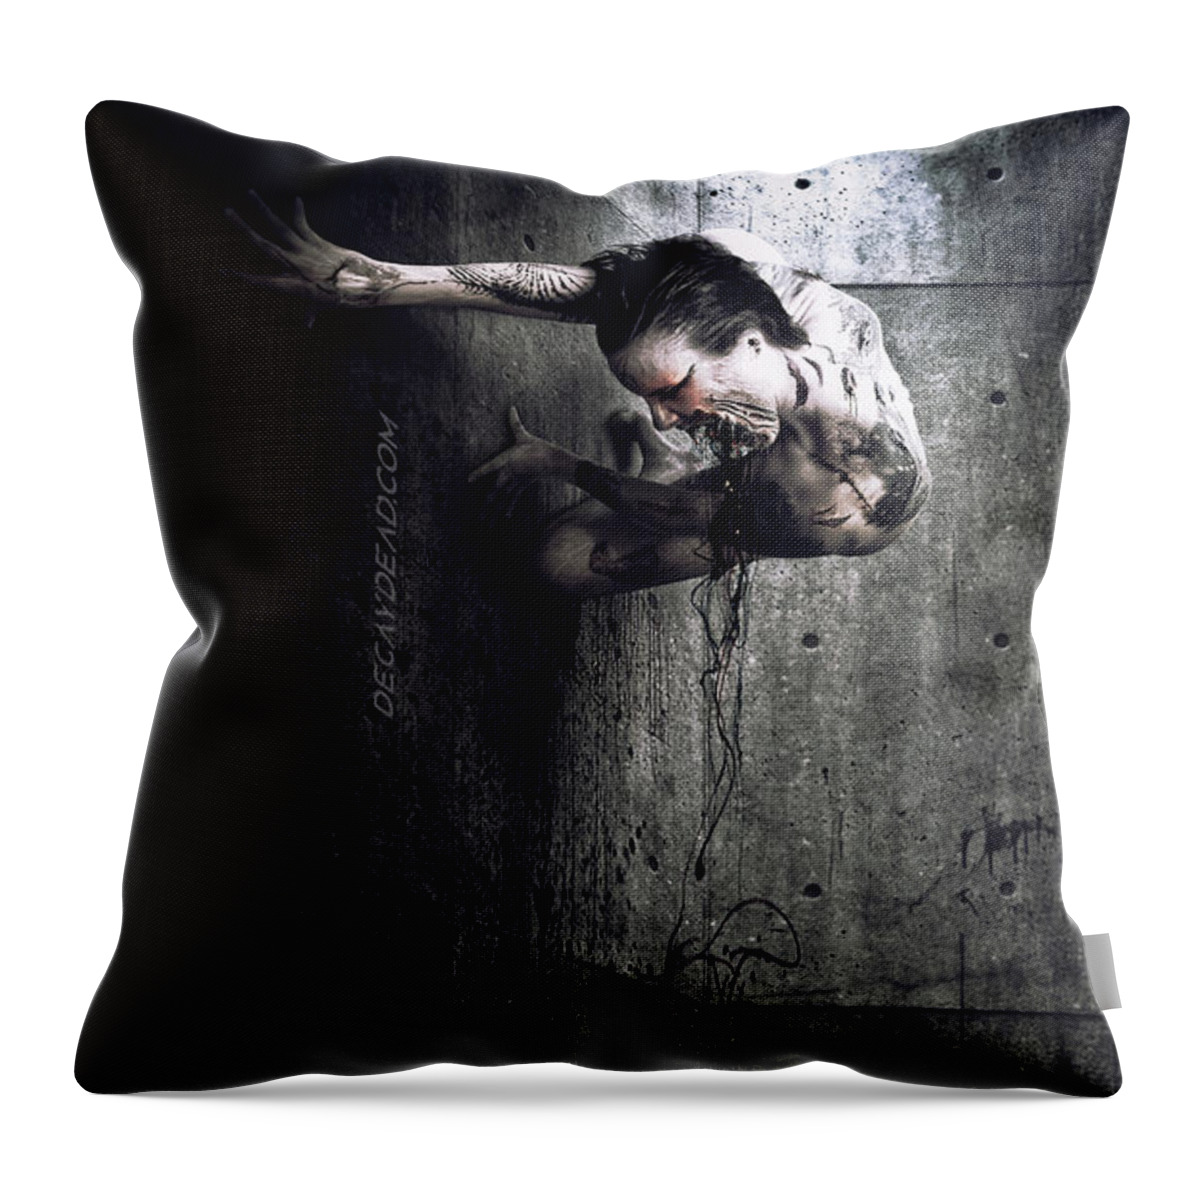 Horror Throw Pillow featuring the digital art Something wicked this way comes by Argus Dorian